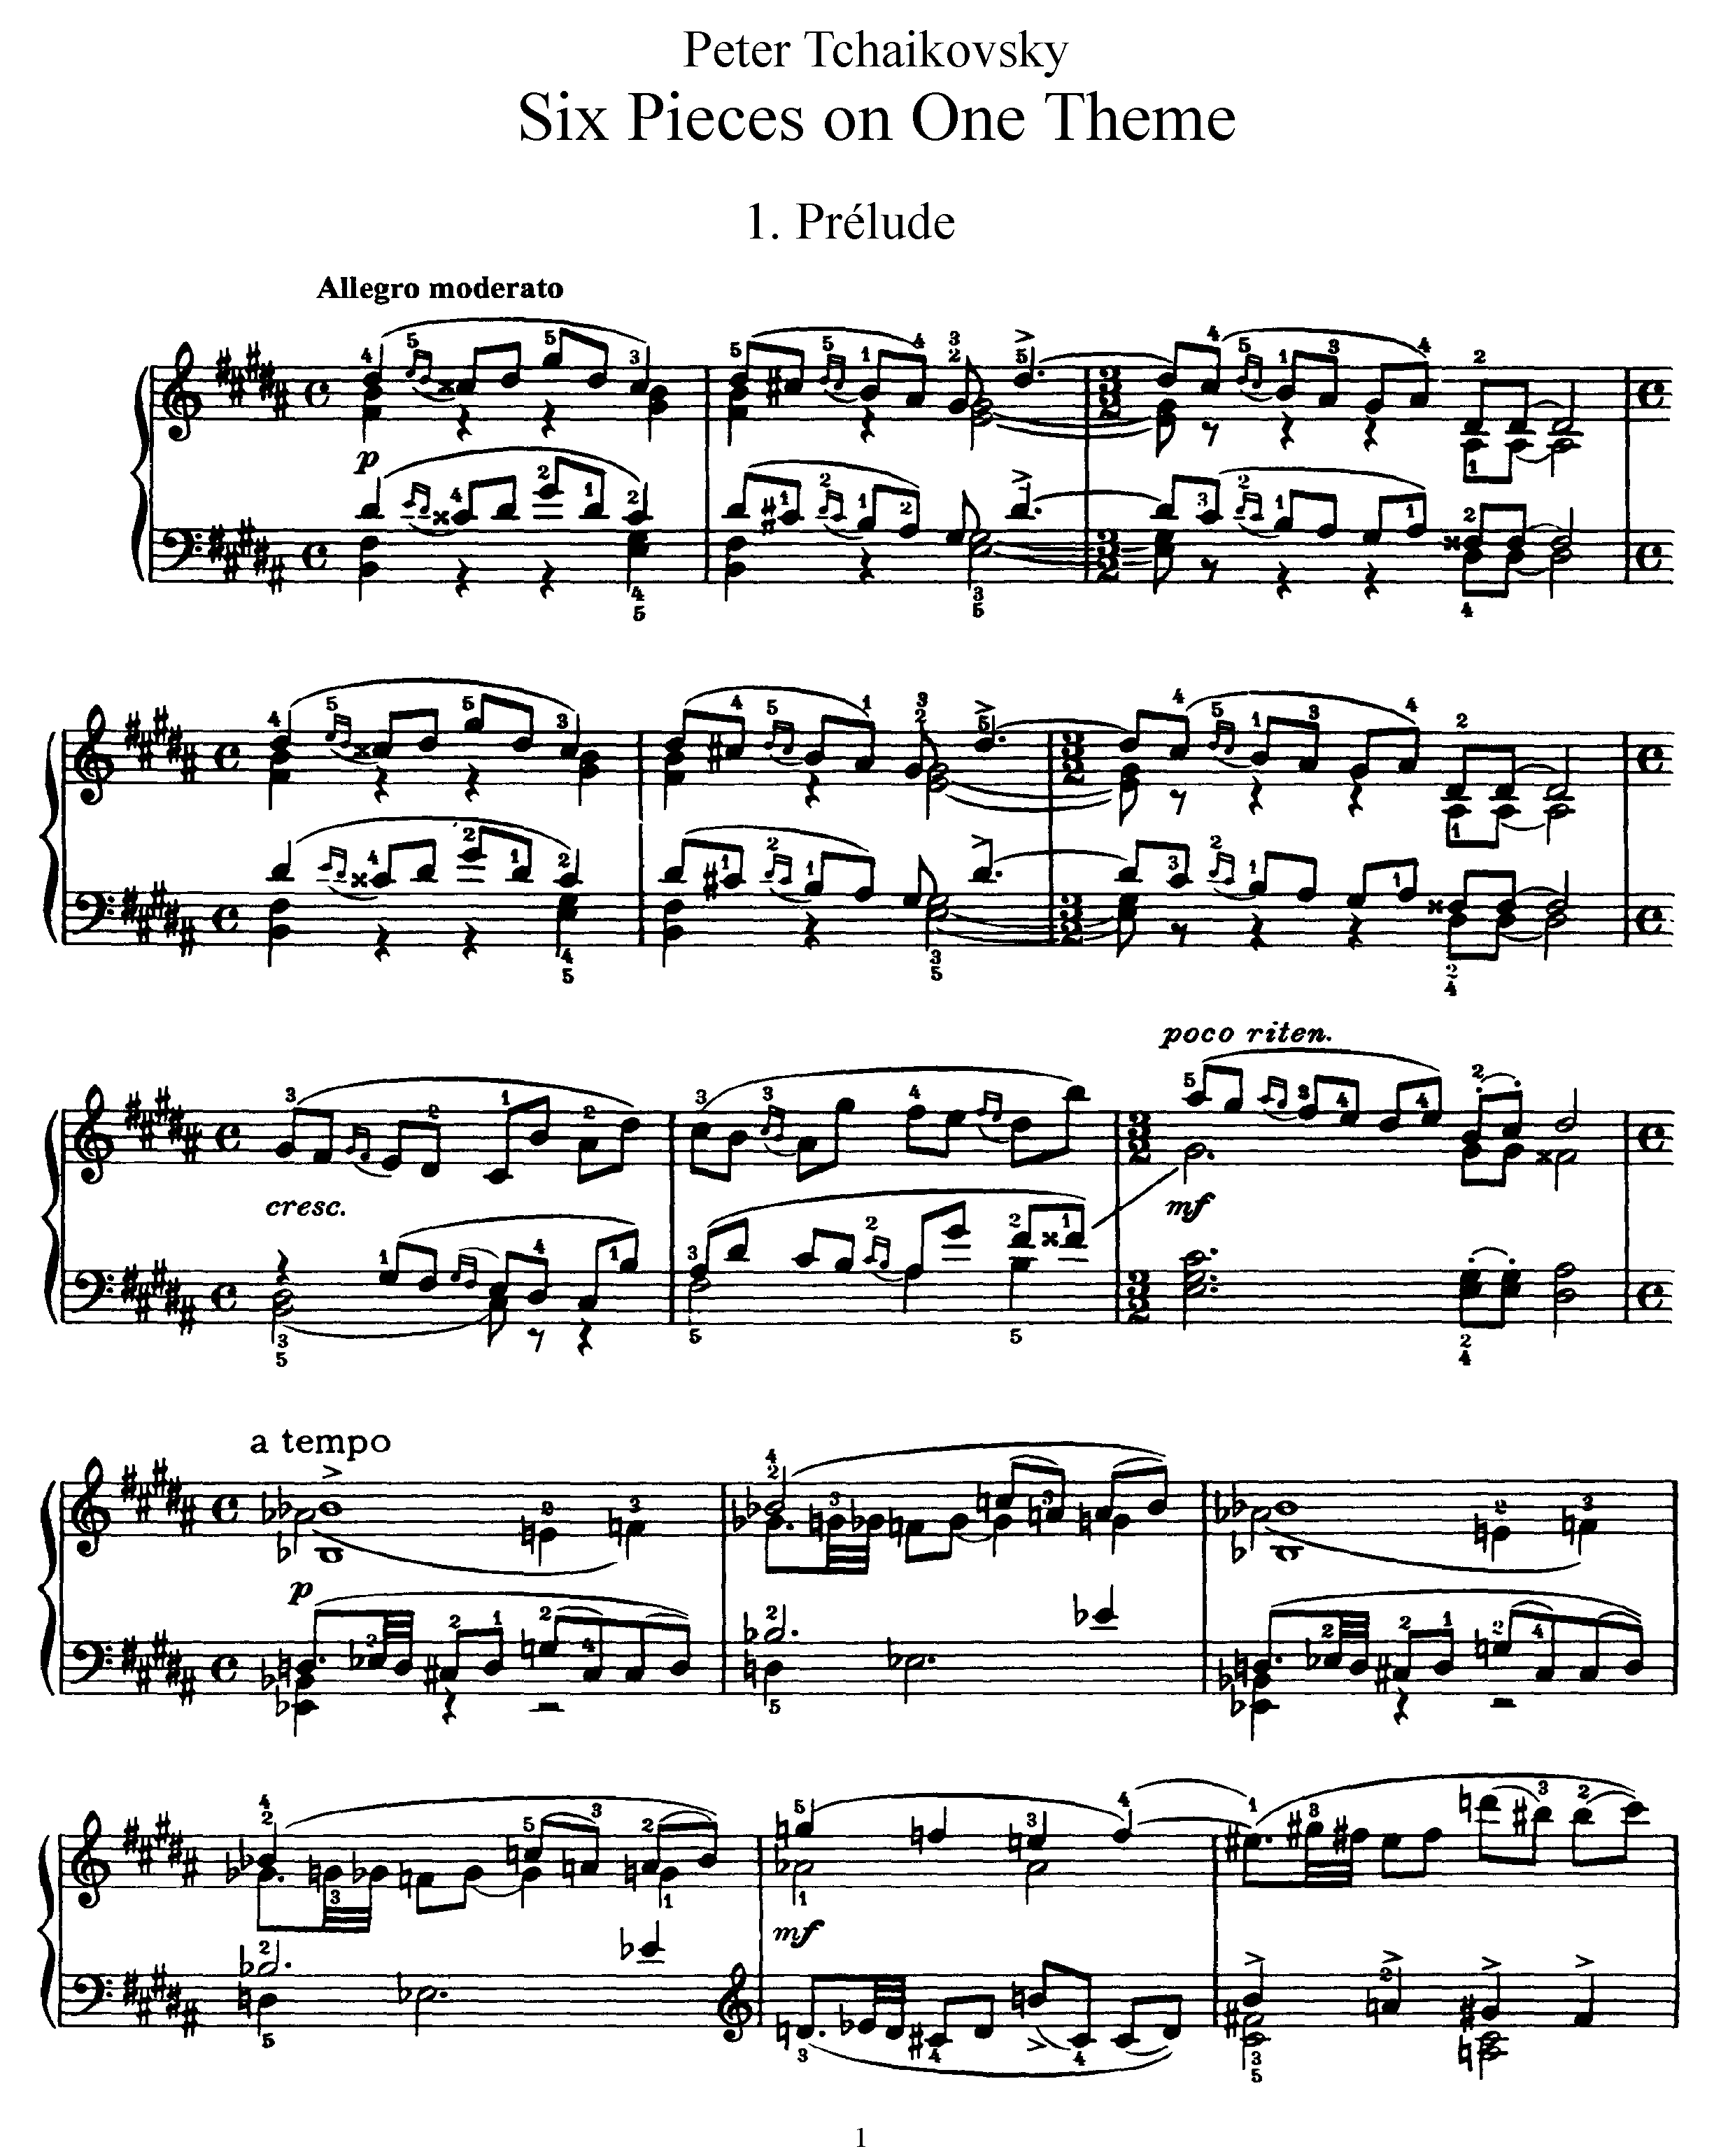 Prelude and Fugue Op. 21 Score